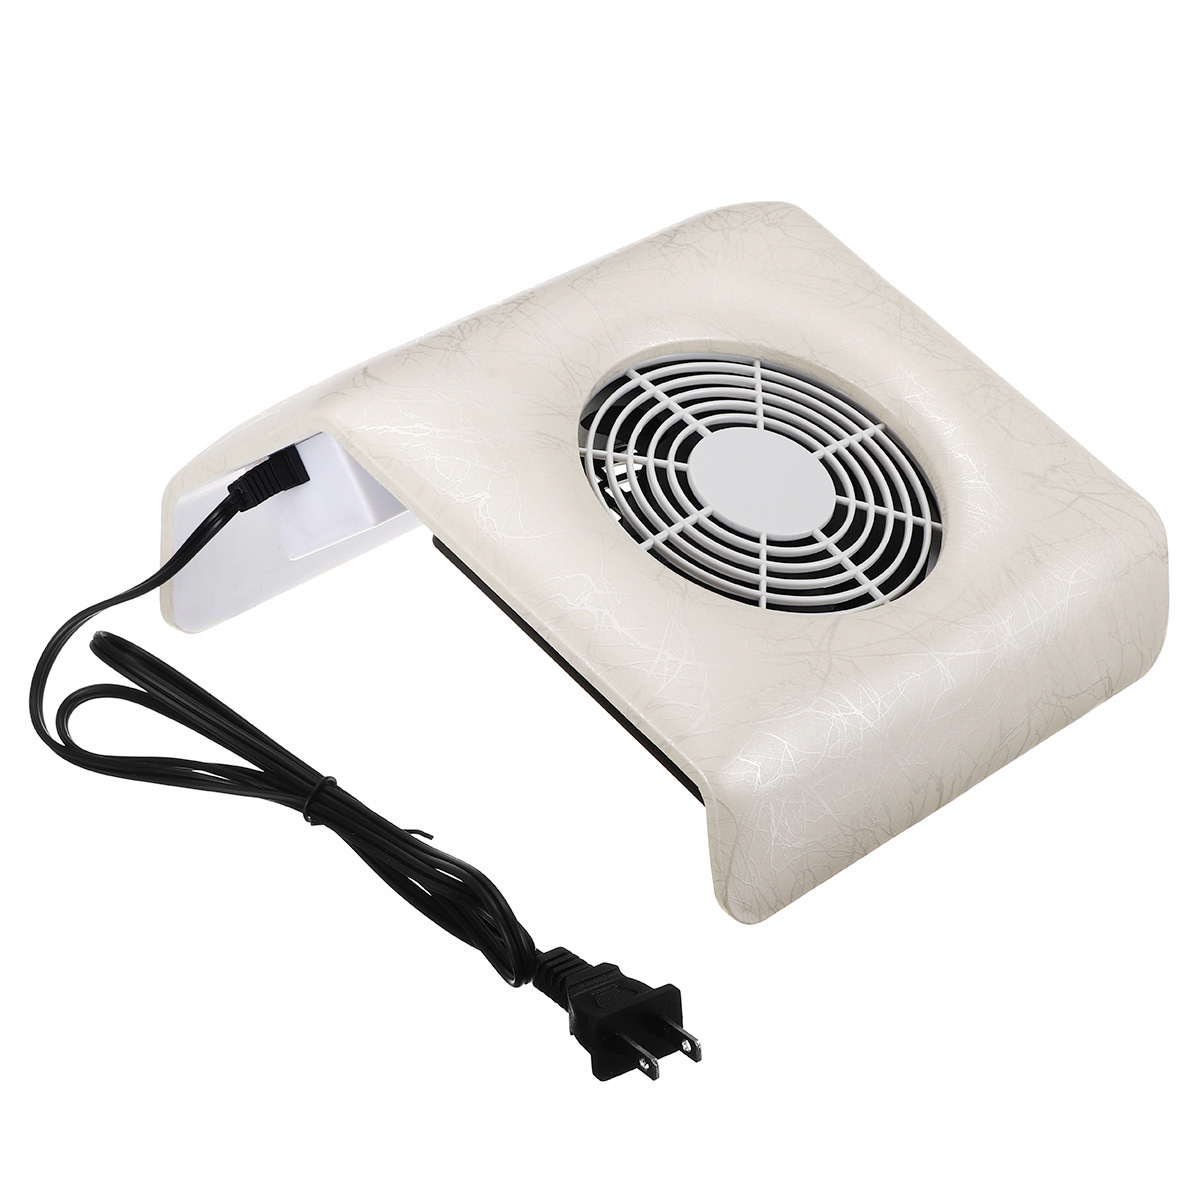 40W-High-Power-Vacuum-Nail-Dust-Collector-For-Manicure-Nails-Collector-With-Fitter-Nail-Dust-Fan-Vac-1940609-8